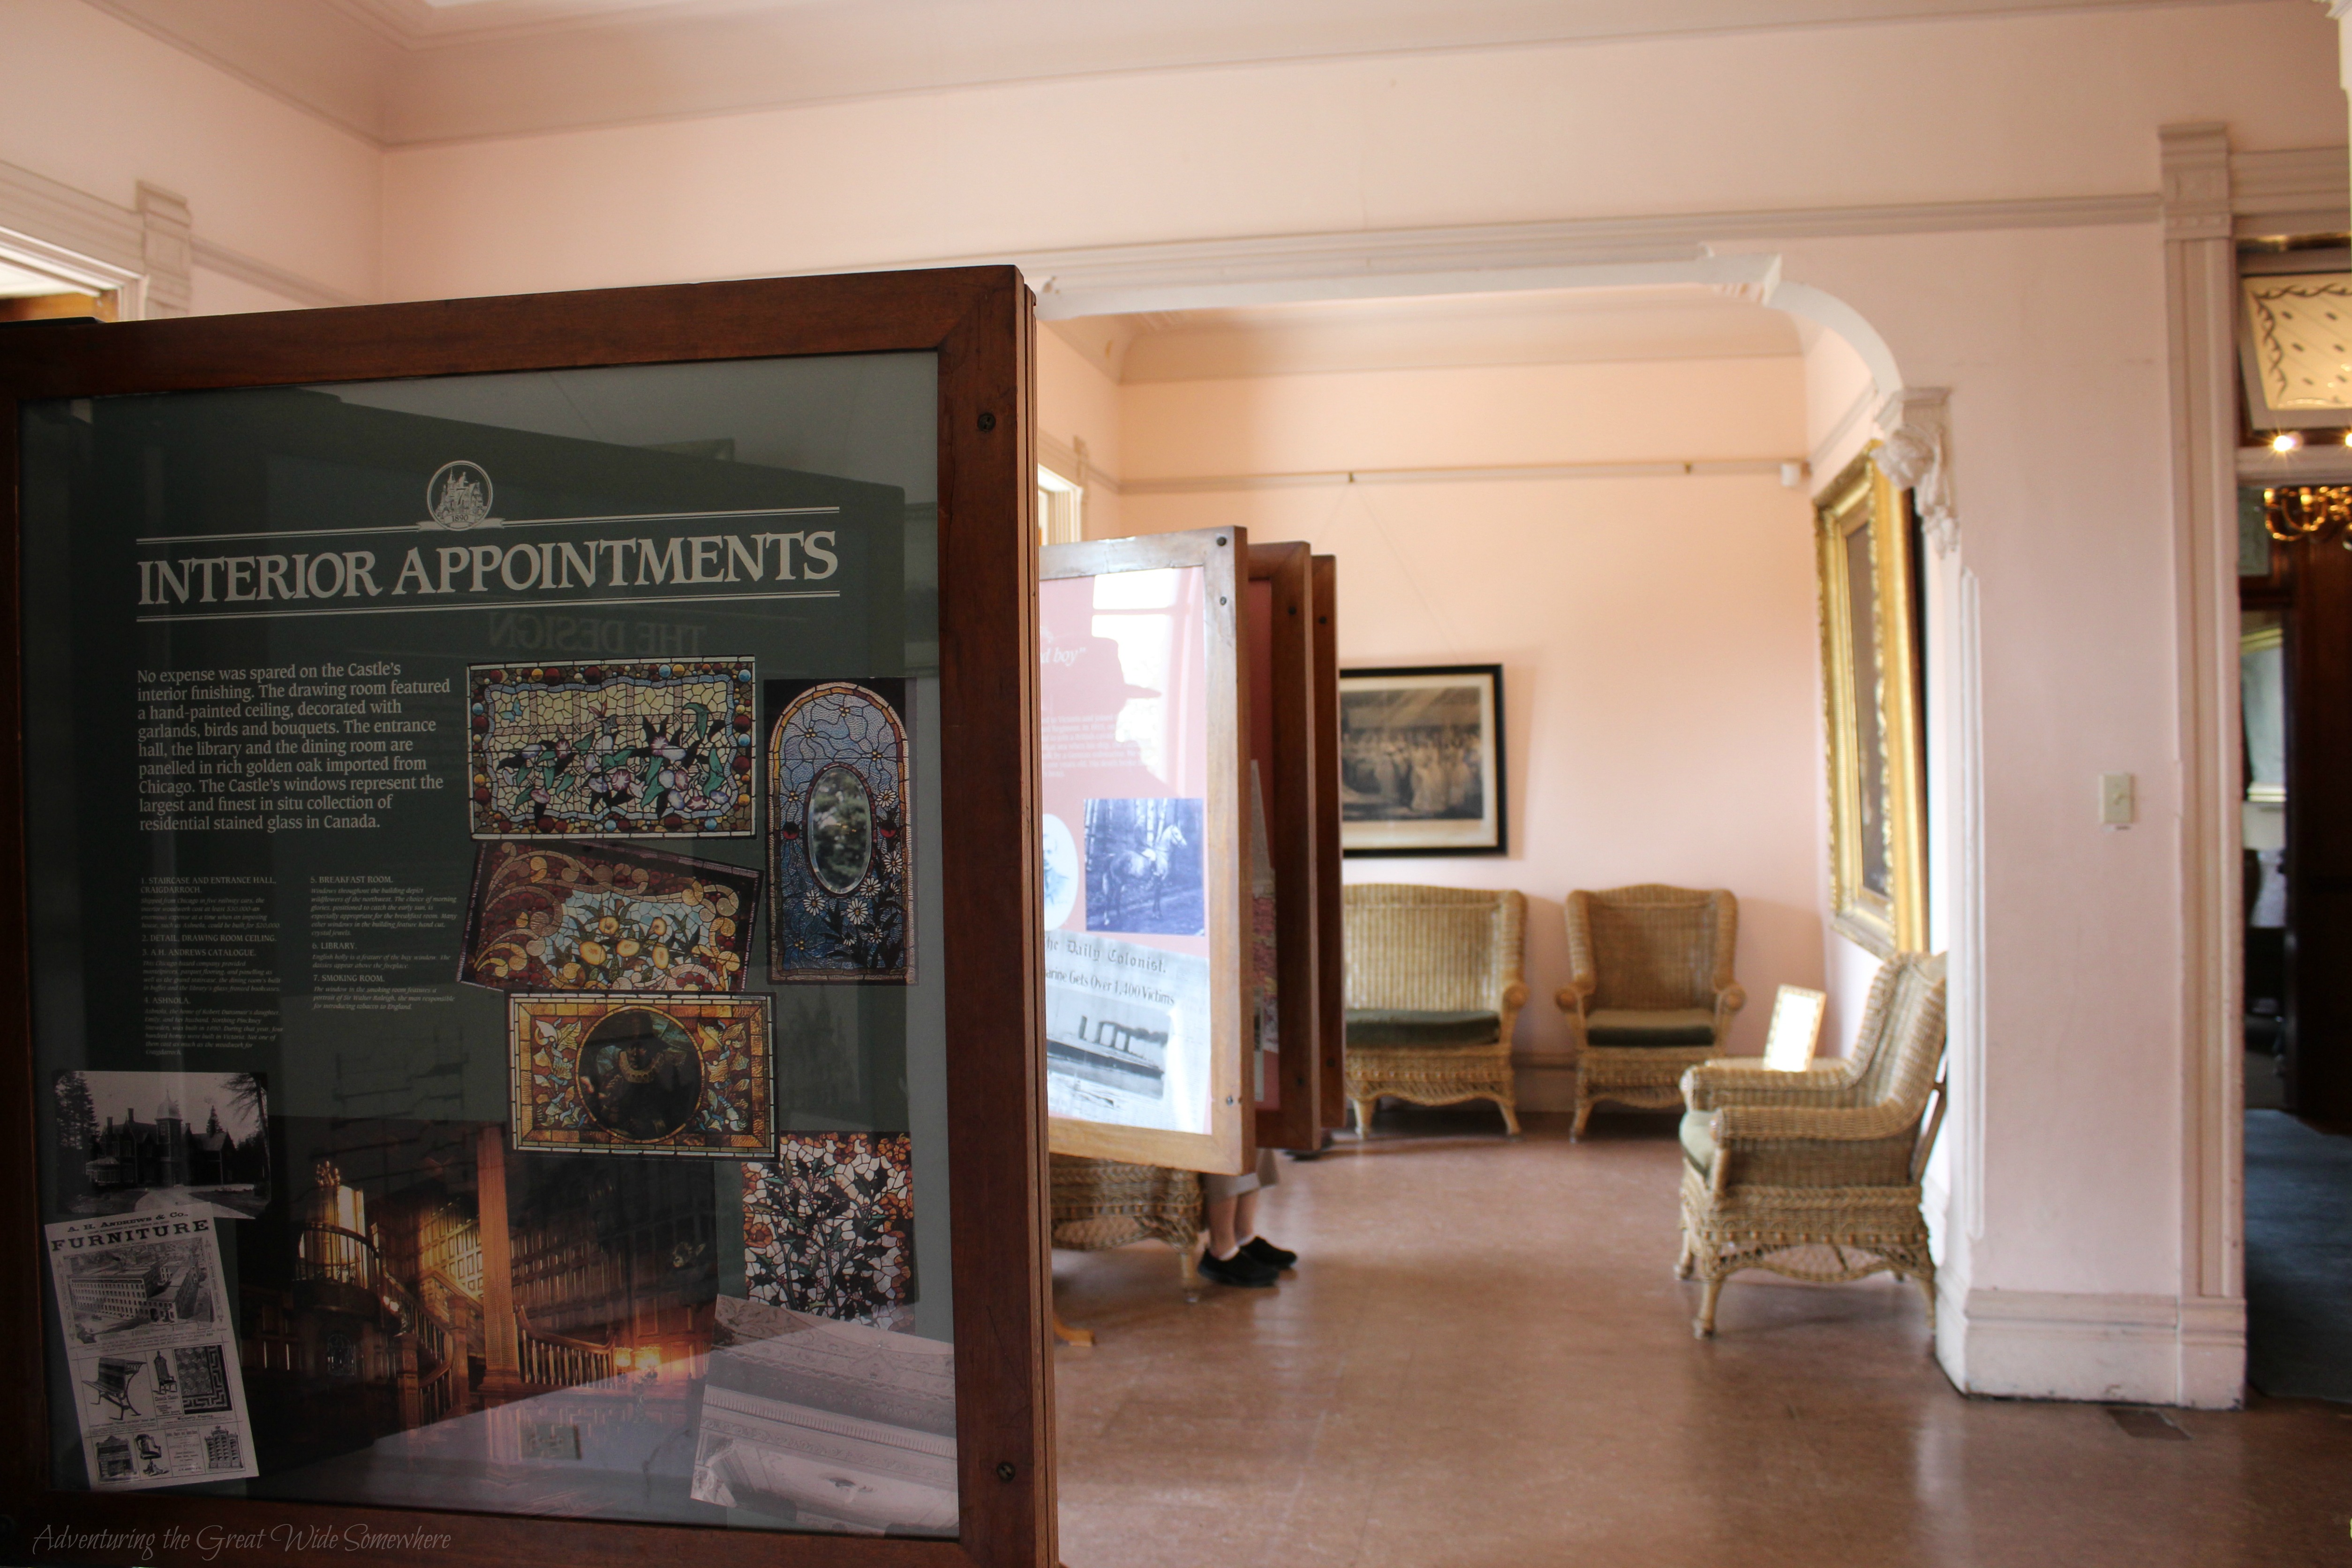 A Room Dedicated to Showcasing the History of Craigdarroch Castle